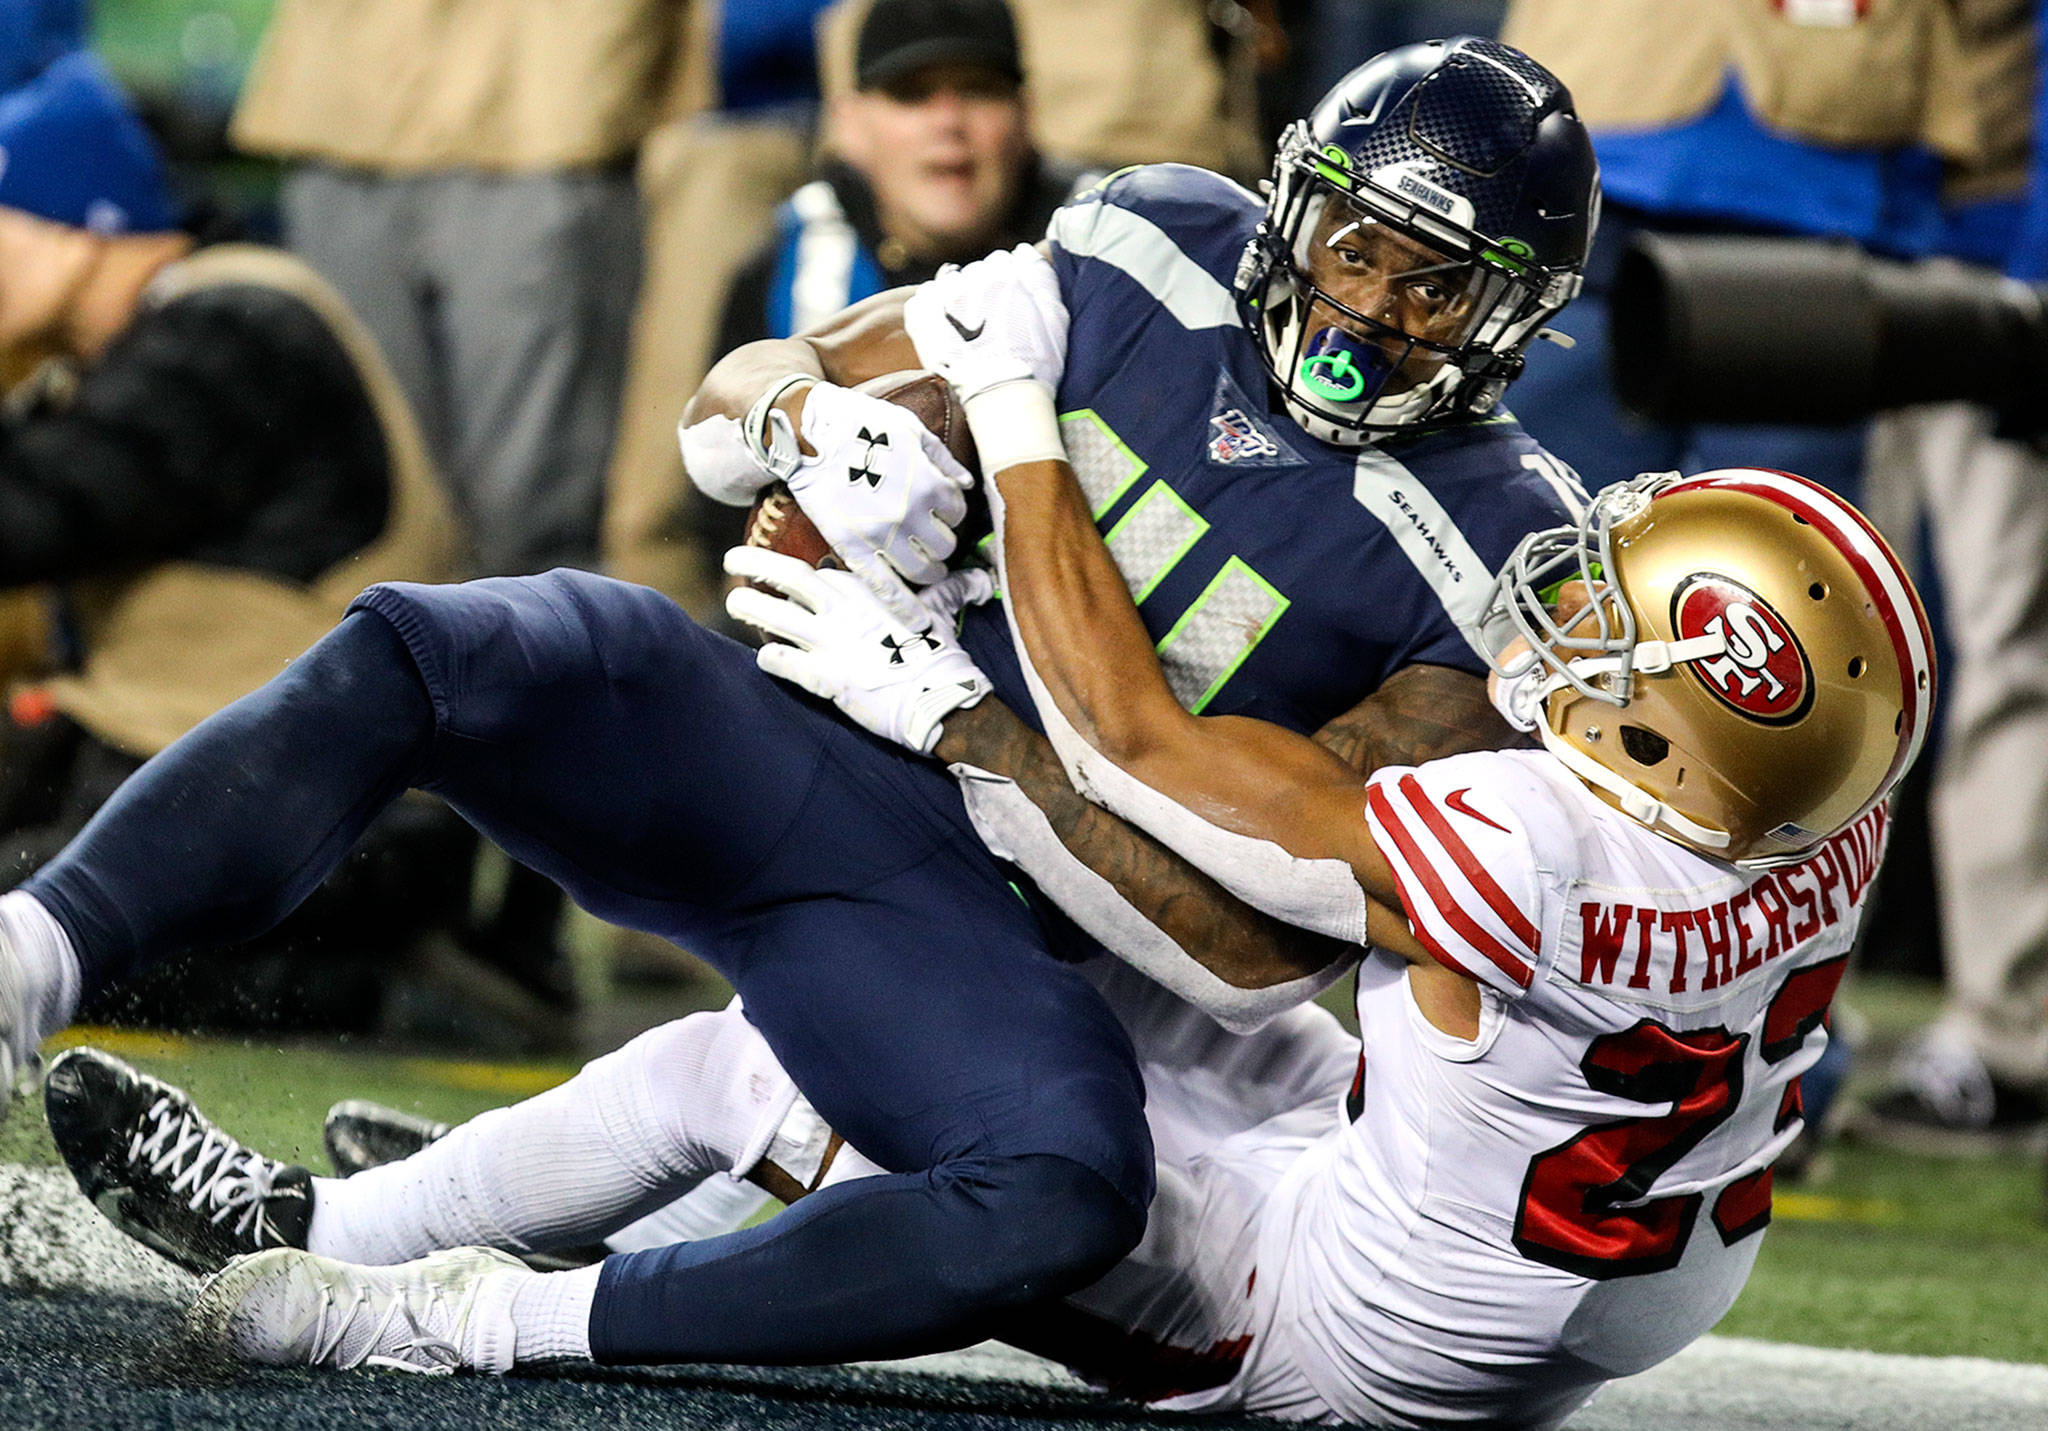 Seattle Seahawks’ DK Metcalf makes a touchdown reception with San Francisco’s Ahkello Witherspoon Sunday evening at CenturyLink Field in Seattle on December 29, 2019. The 49ers won 26-21. (TJ Mullinax / for The Herald)